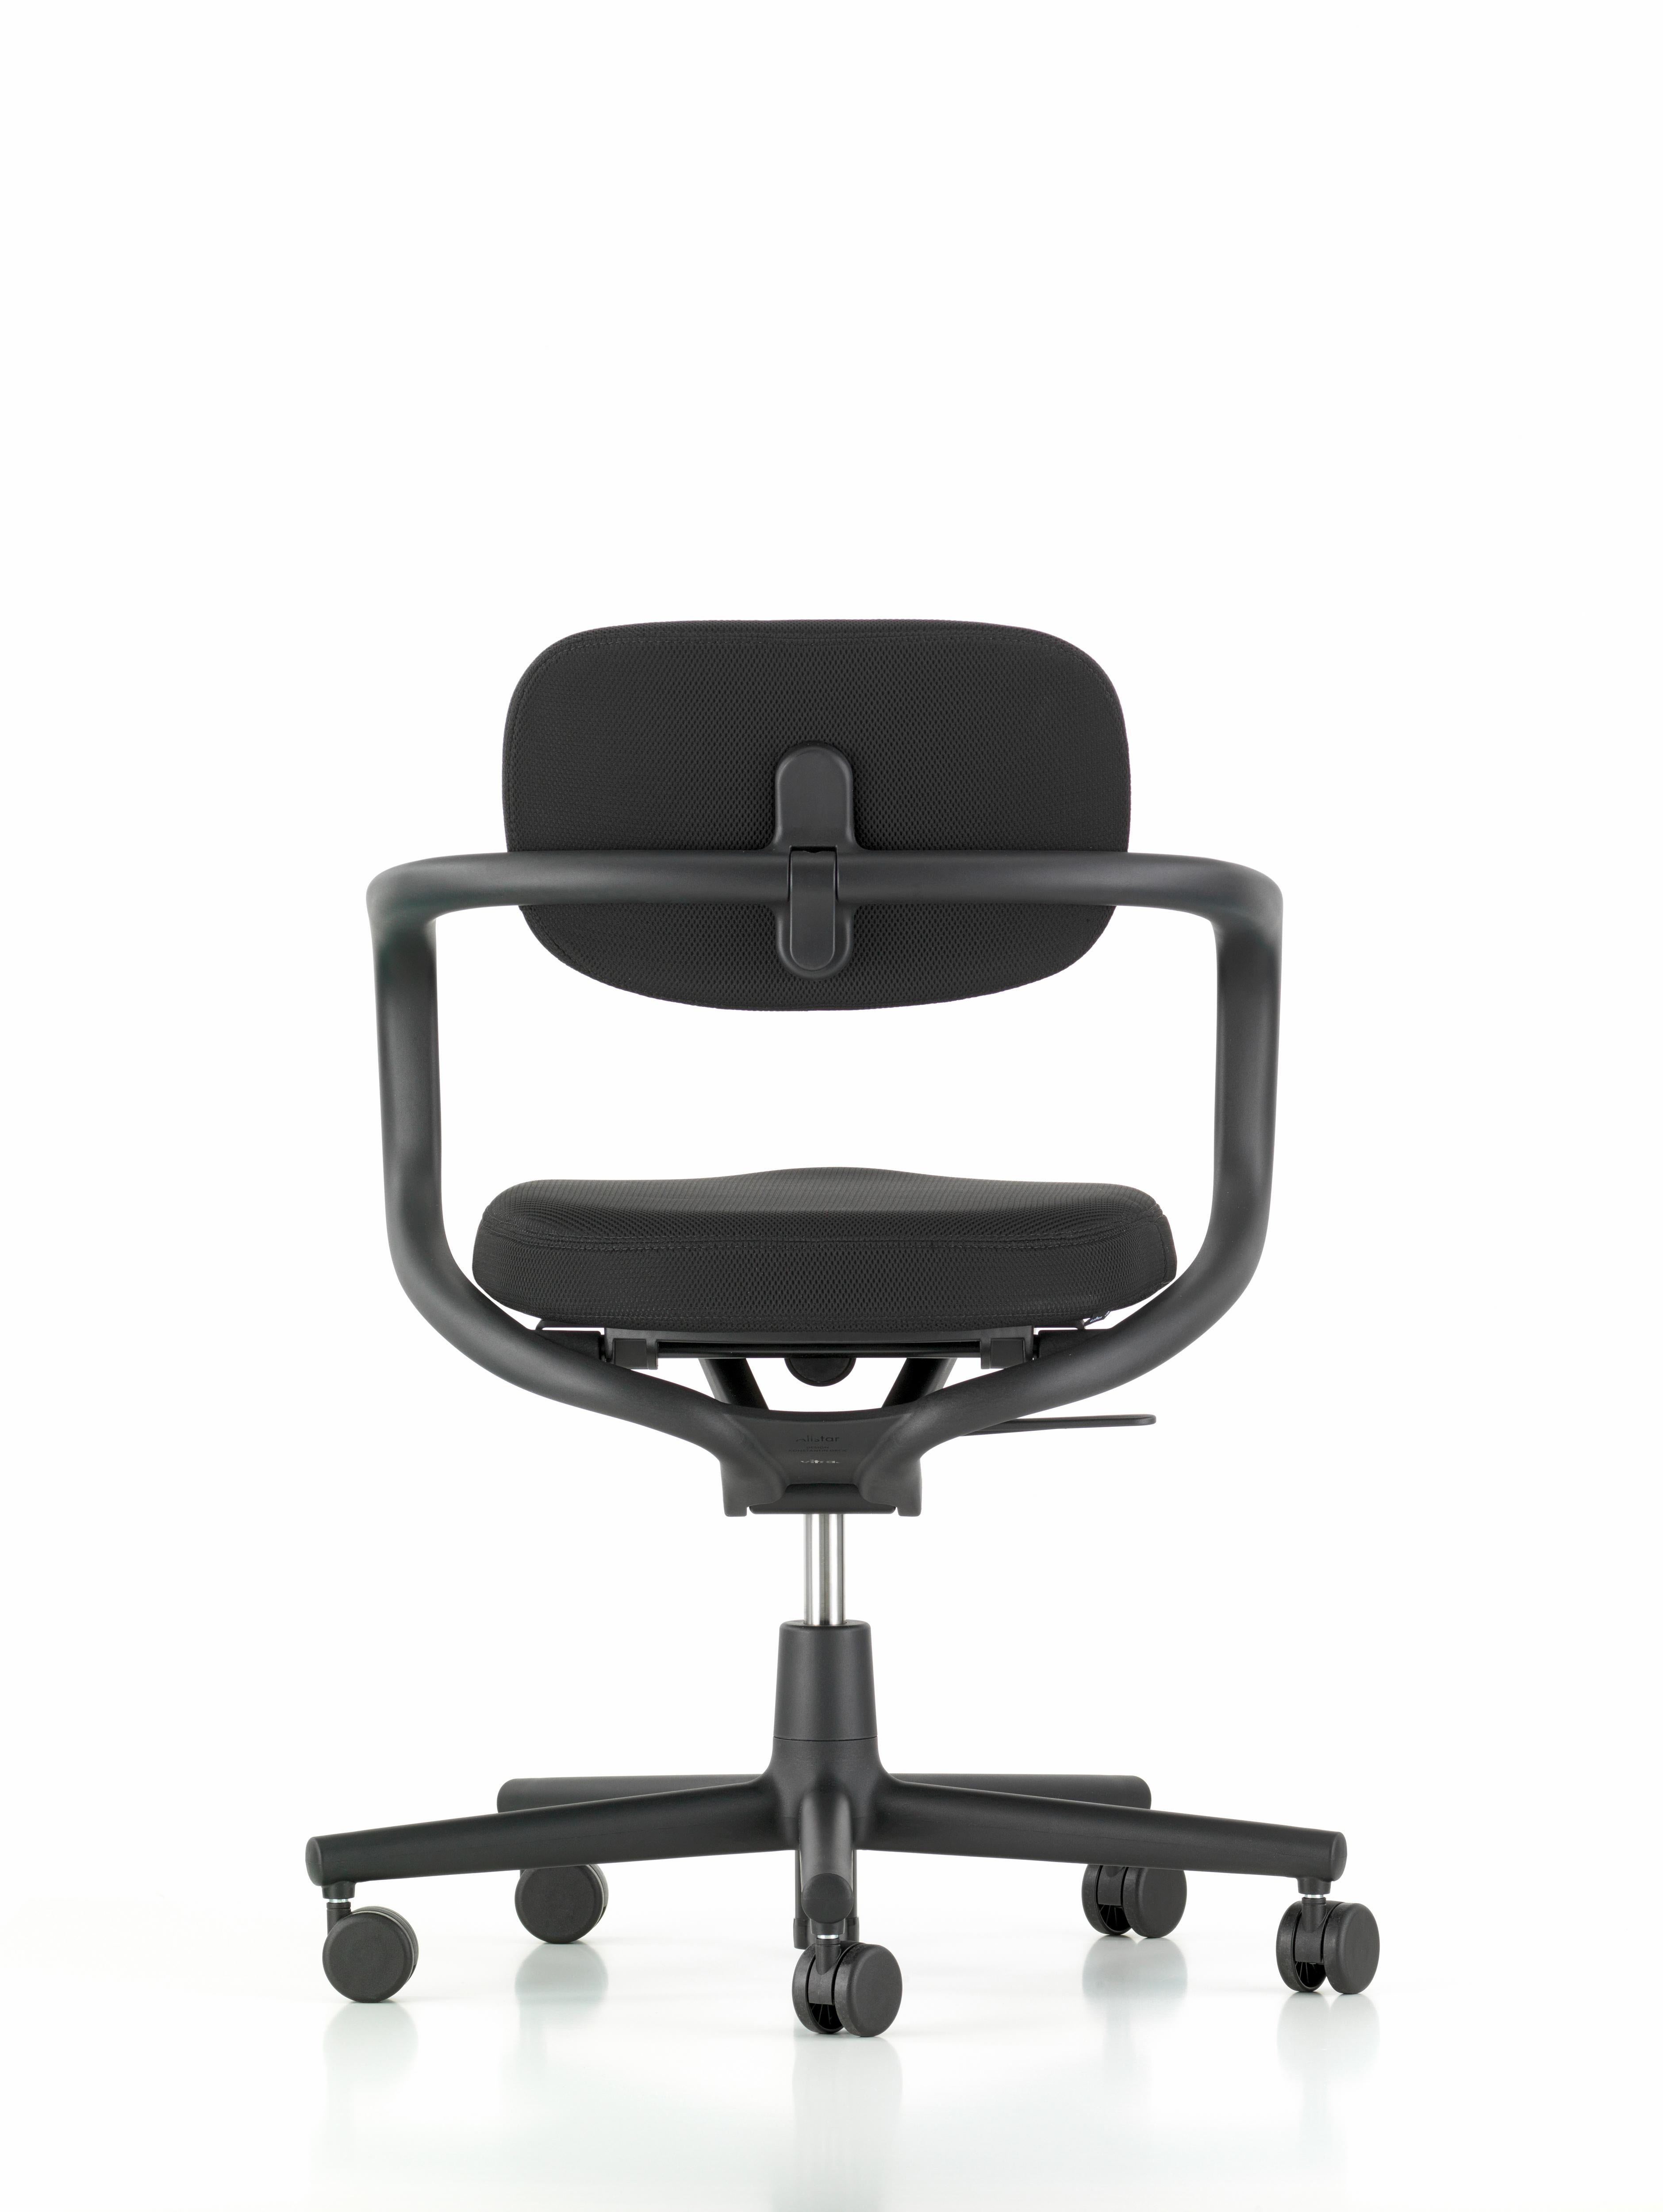 These items are only available in the United States.

The Allstar chair defines conventional categorizations: is it a chair for office workplaces or the home office? What period is it from? Does it fulfill specific functions? What is it made of? In